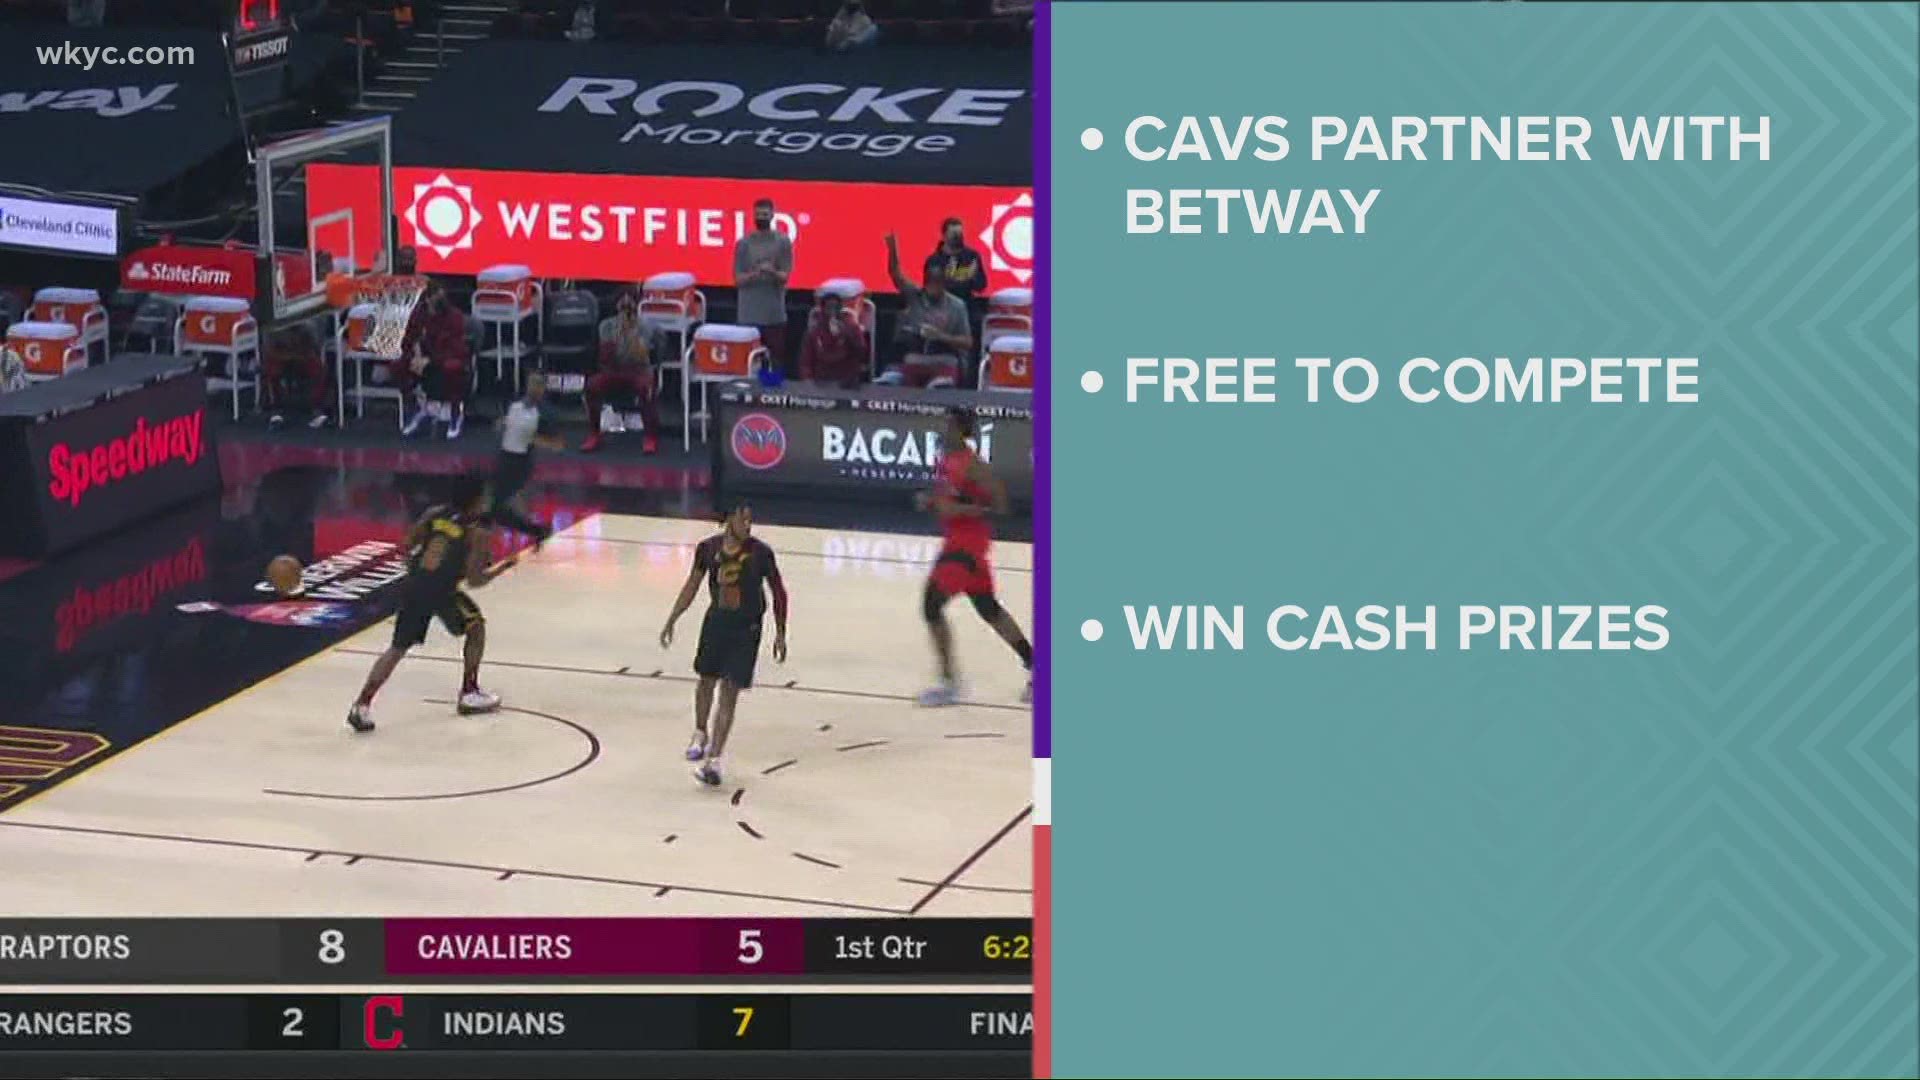 Sports gambling might not be legal in Ohio but the Cavs are getting a head start.  The team has partnered with an online gaming company called Betway.